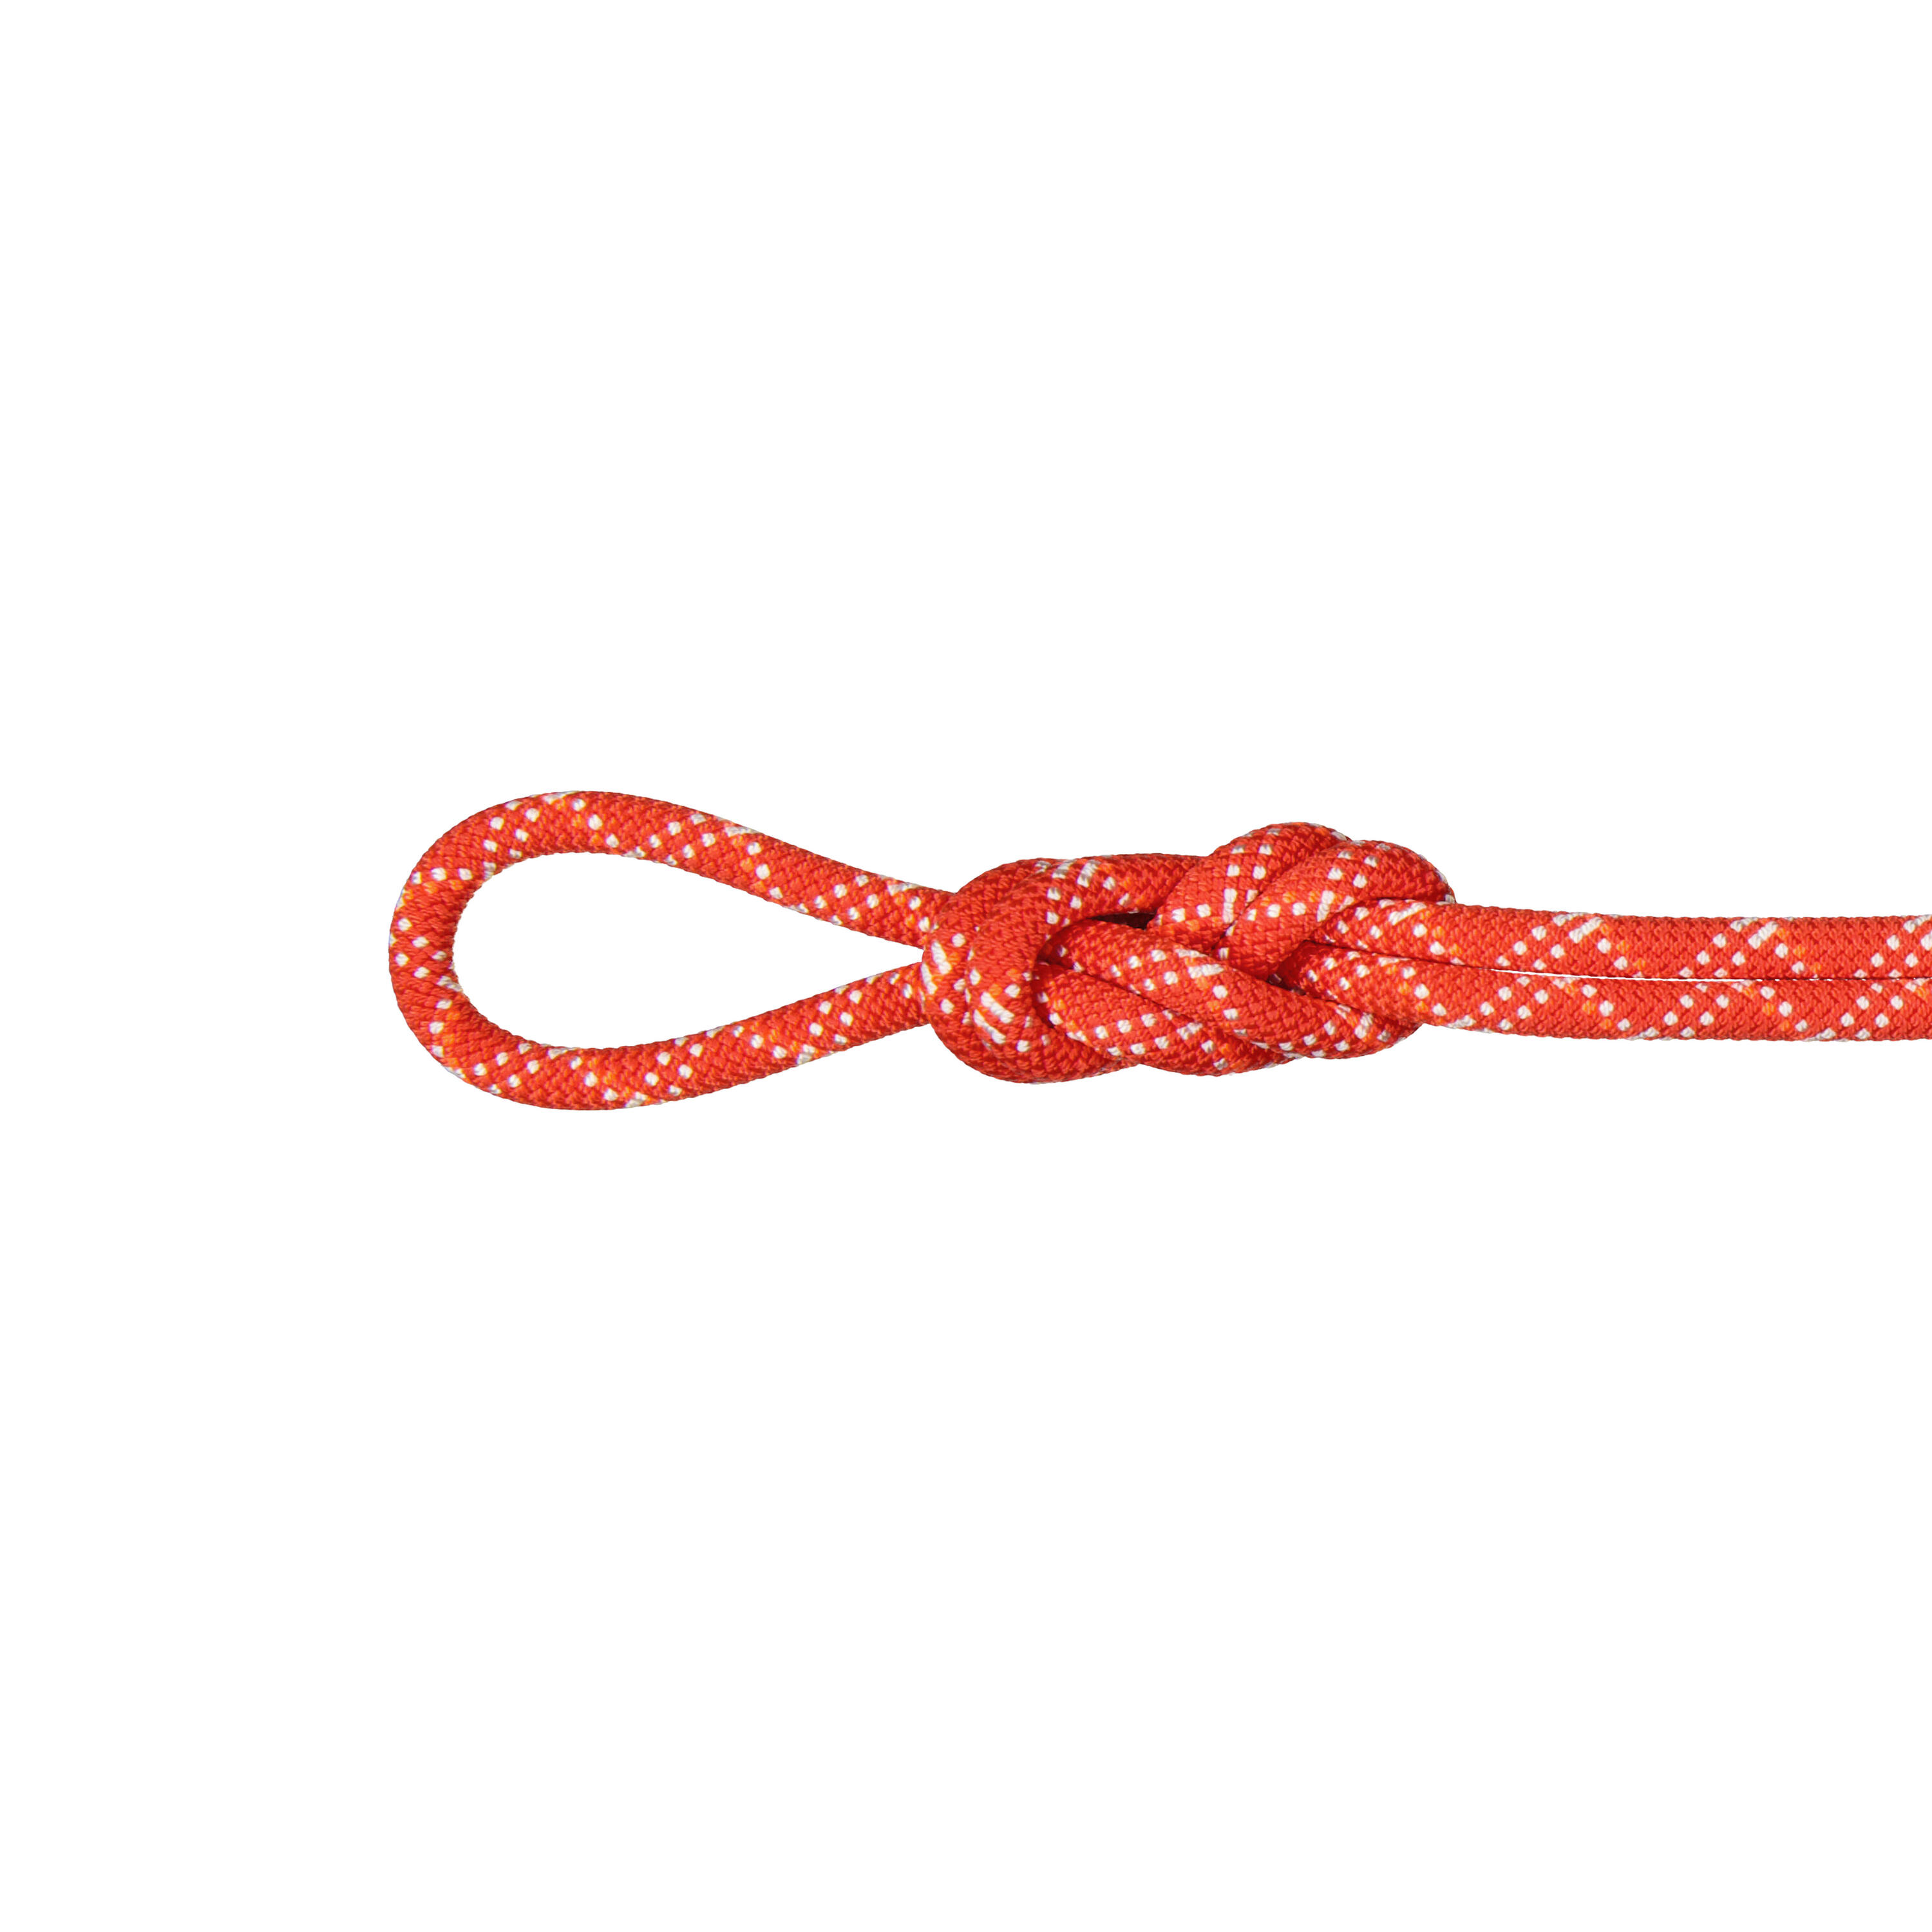 Gym Classic Single Rope 9.5 mm x 50m - Red 1/5